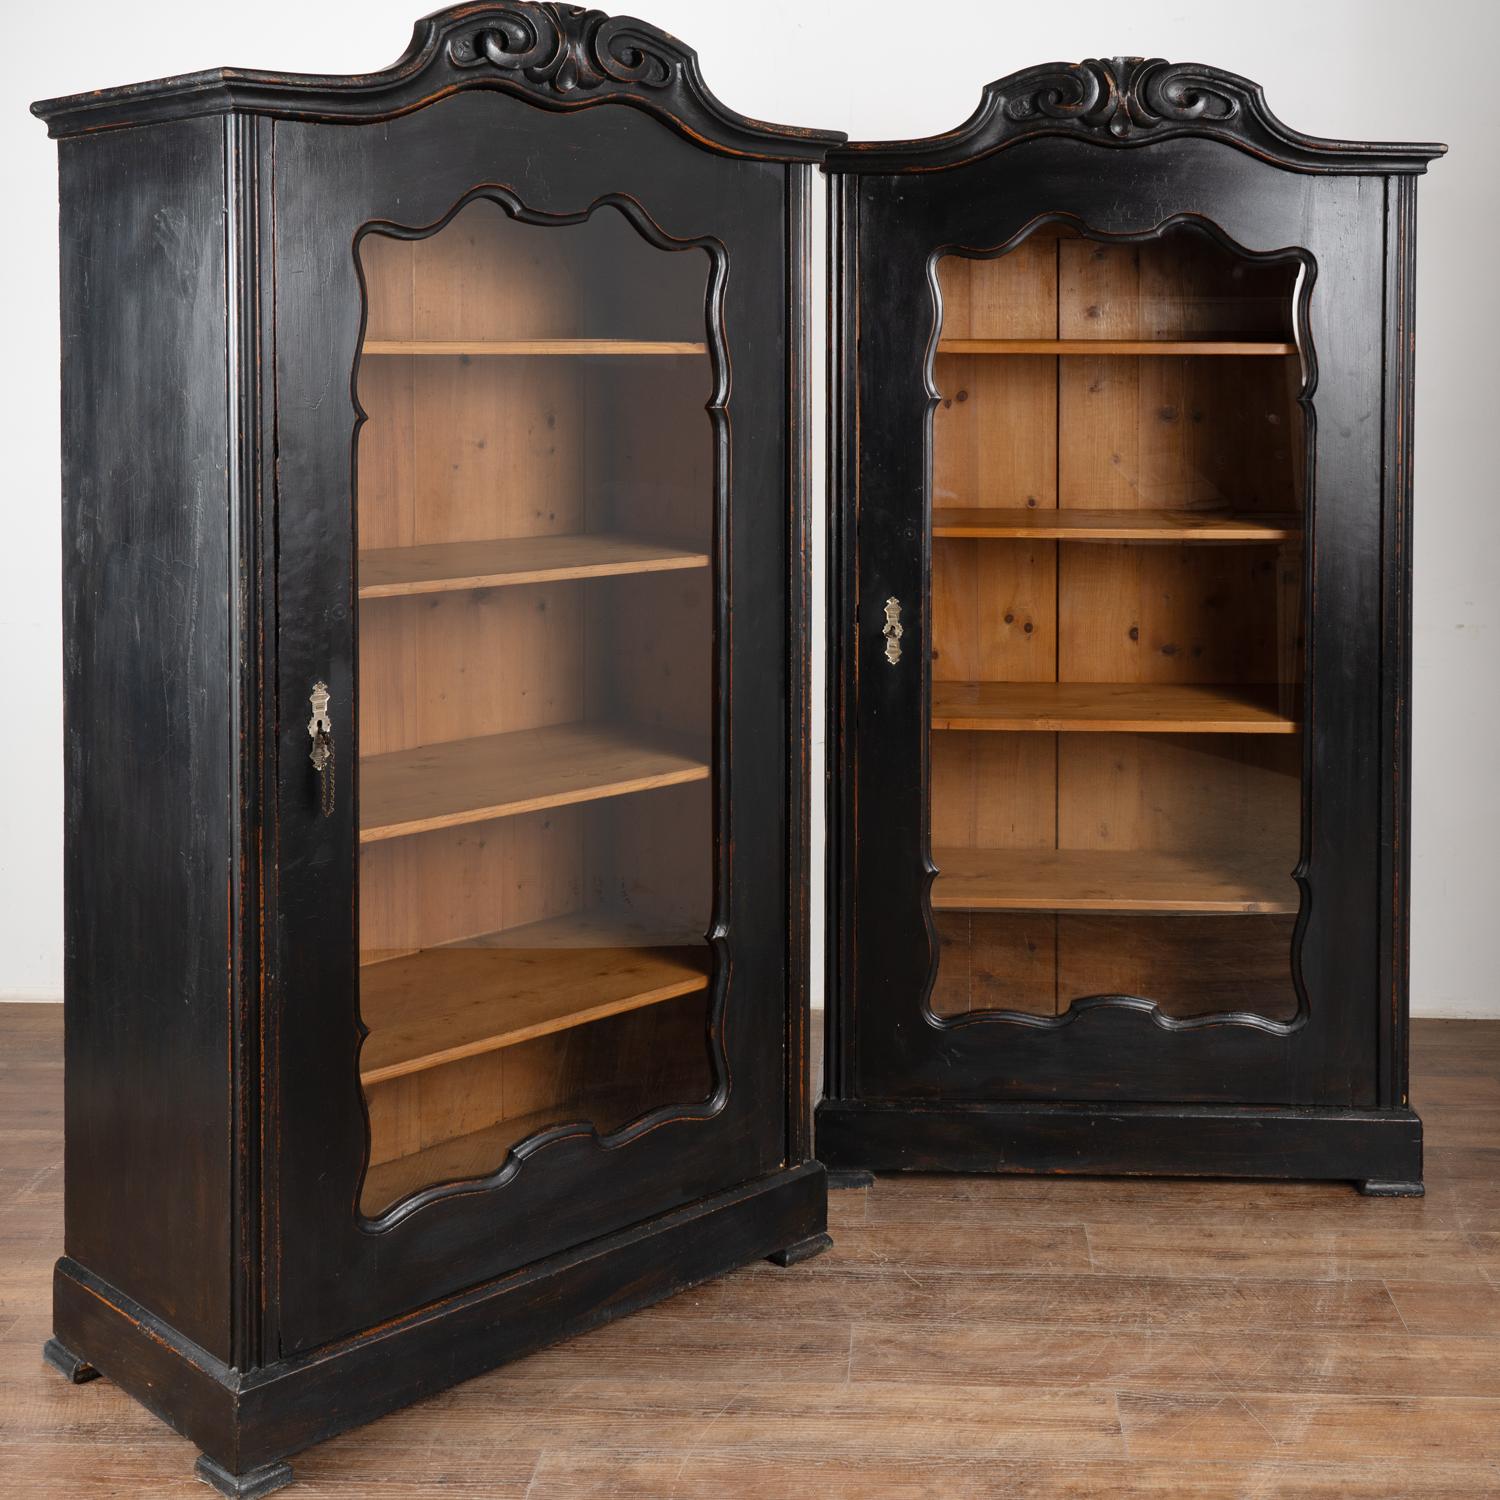 These exceptional bookcases are a tremendous find as it is difficult to find a matching pair. The professionally applied (newer) black painted finish is lightly distressed to fit the age and character of the pair.
These pine display cabinets have